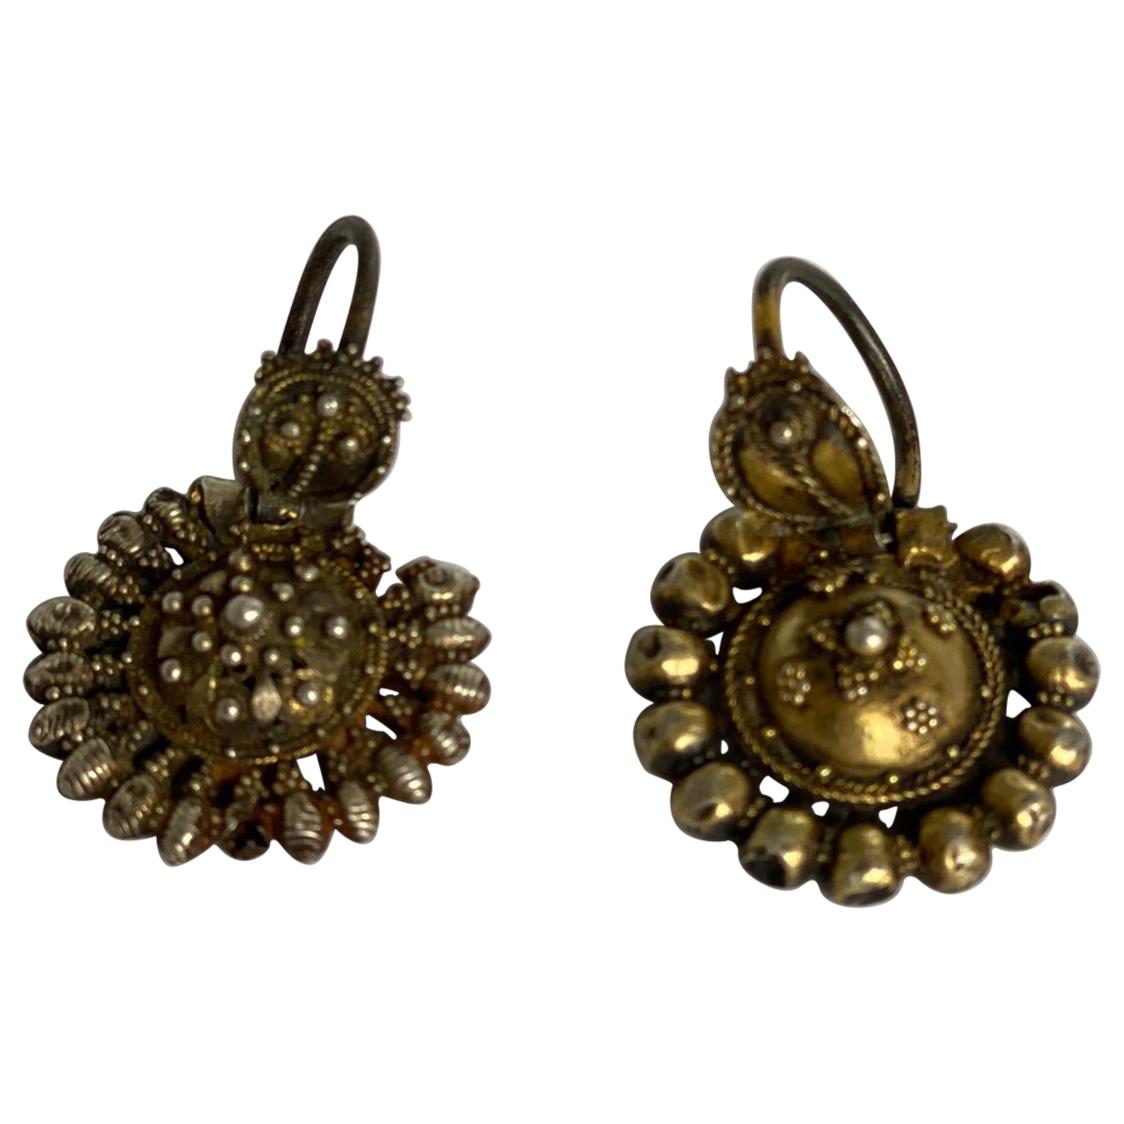 Byzantine Silver-Gilted Filigree Bride's Earrings Arpalii 